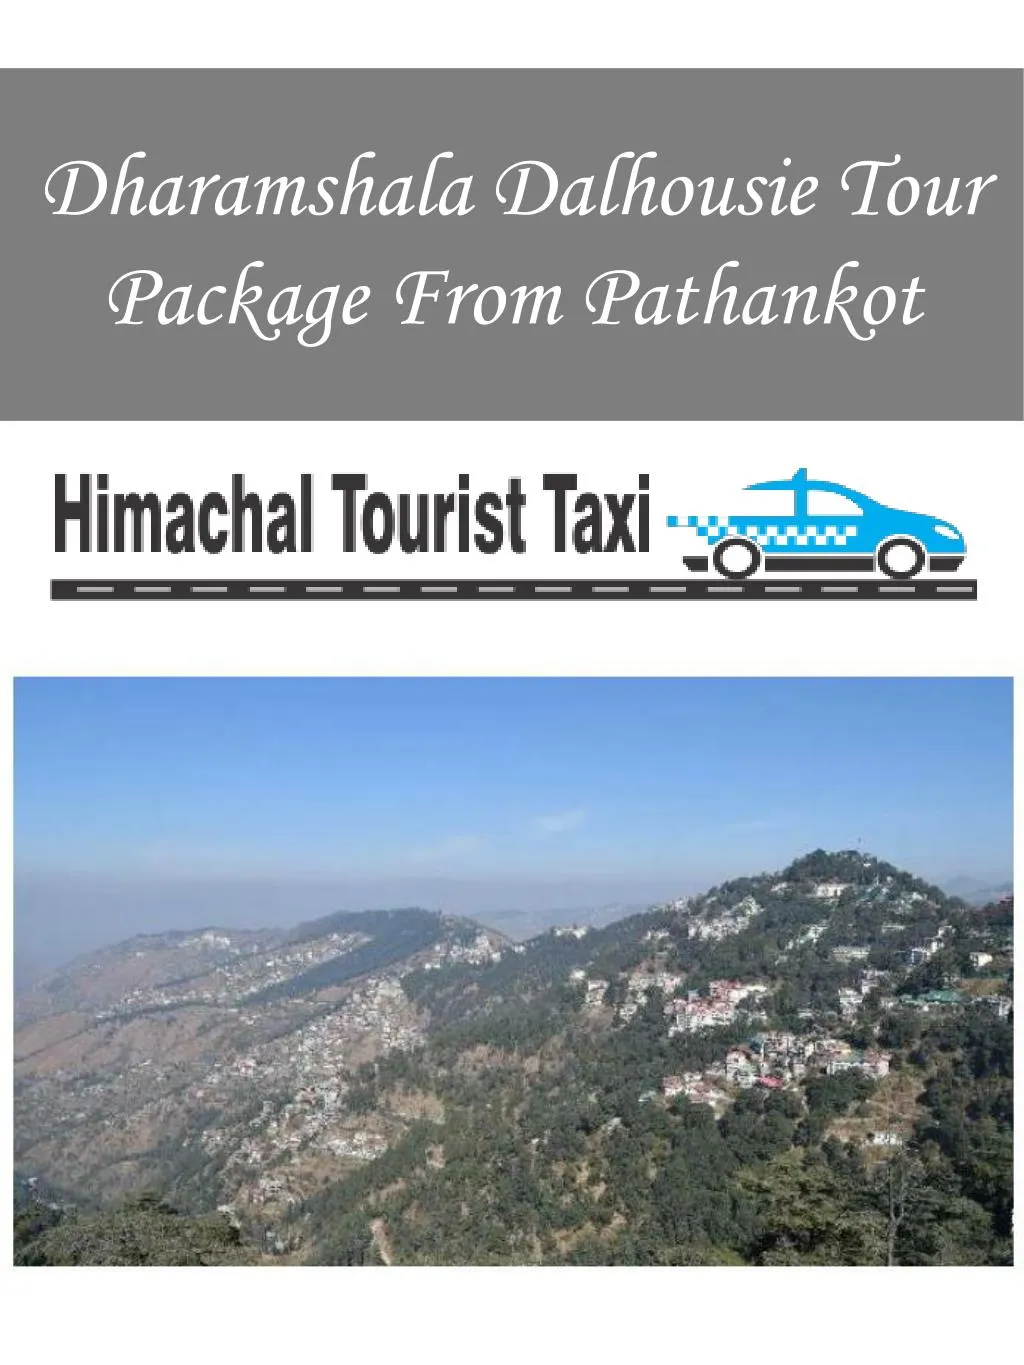 dharamshala dalhousie tour package from pathankot